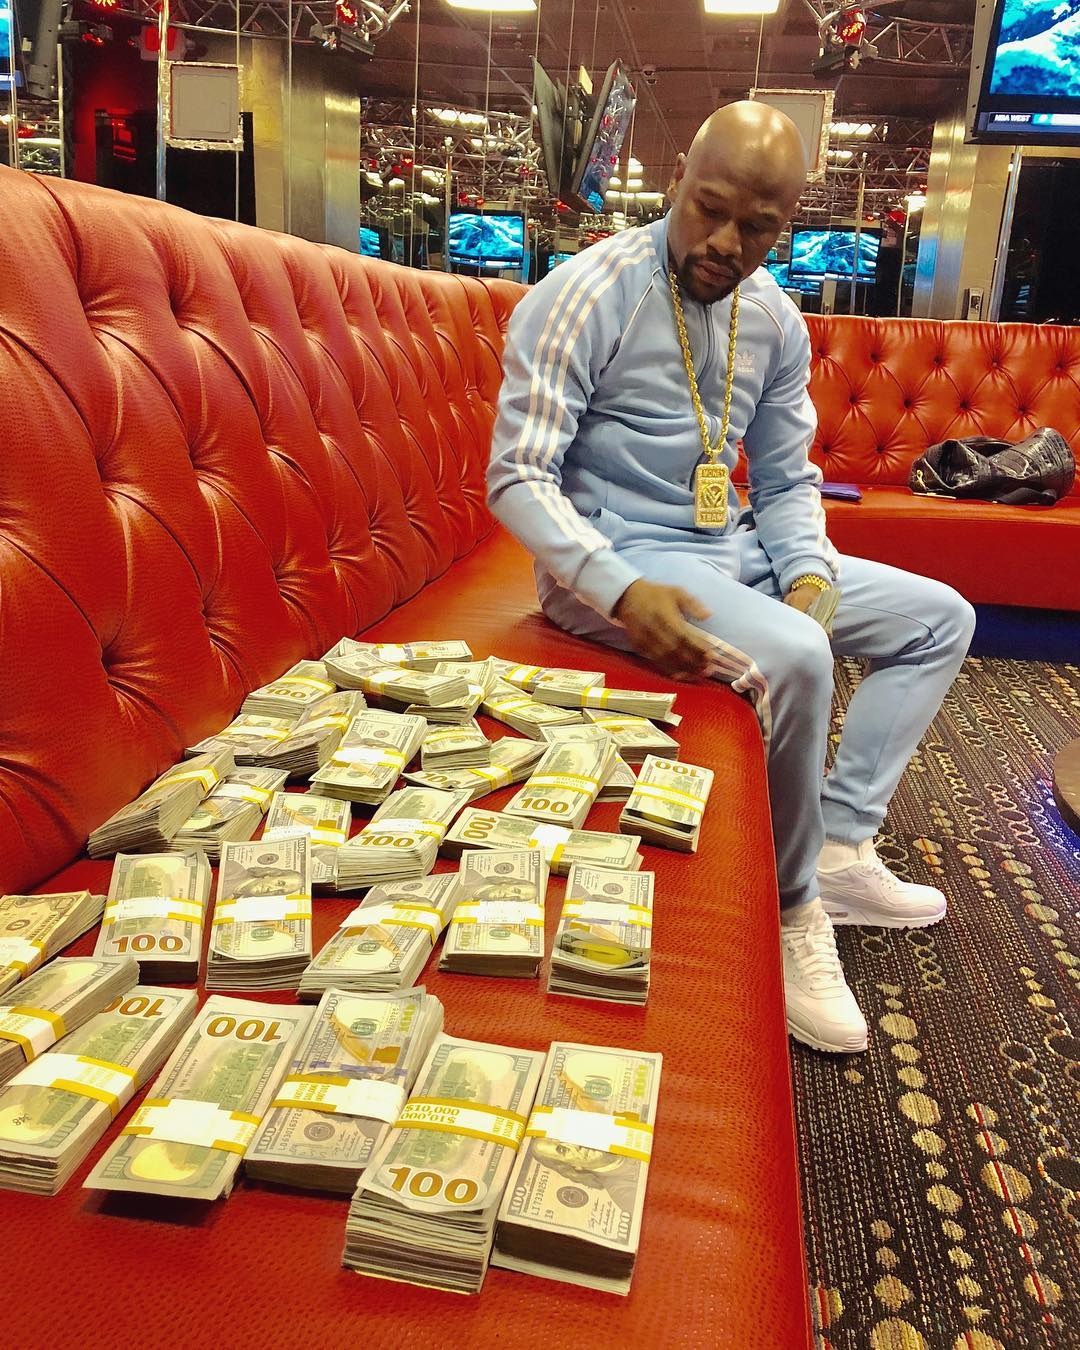 Floyd Mayweather's $450m business empire. Money wants to add the NBA franchise to his incredible portfolio.